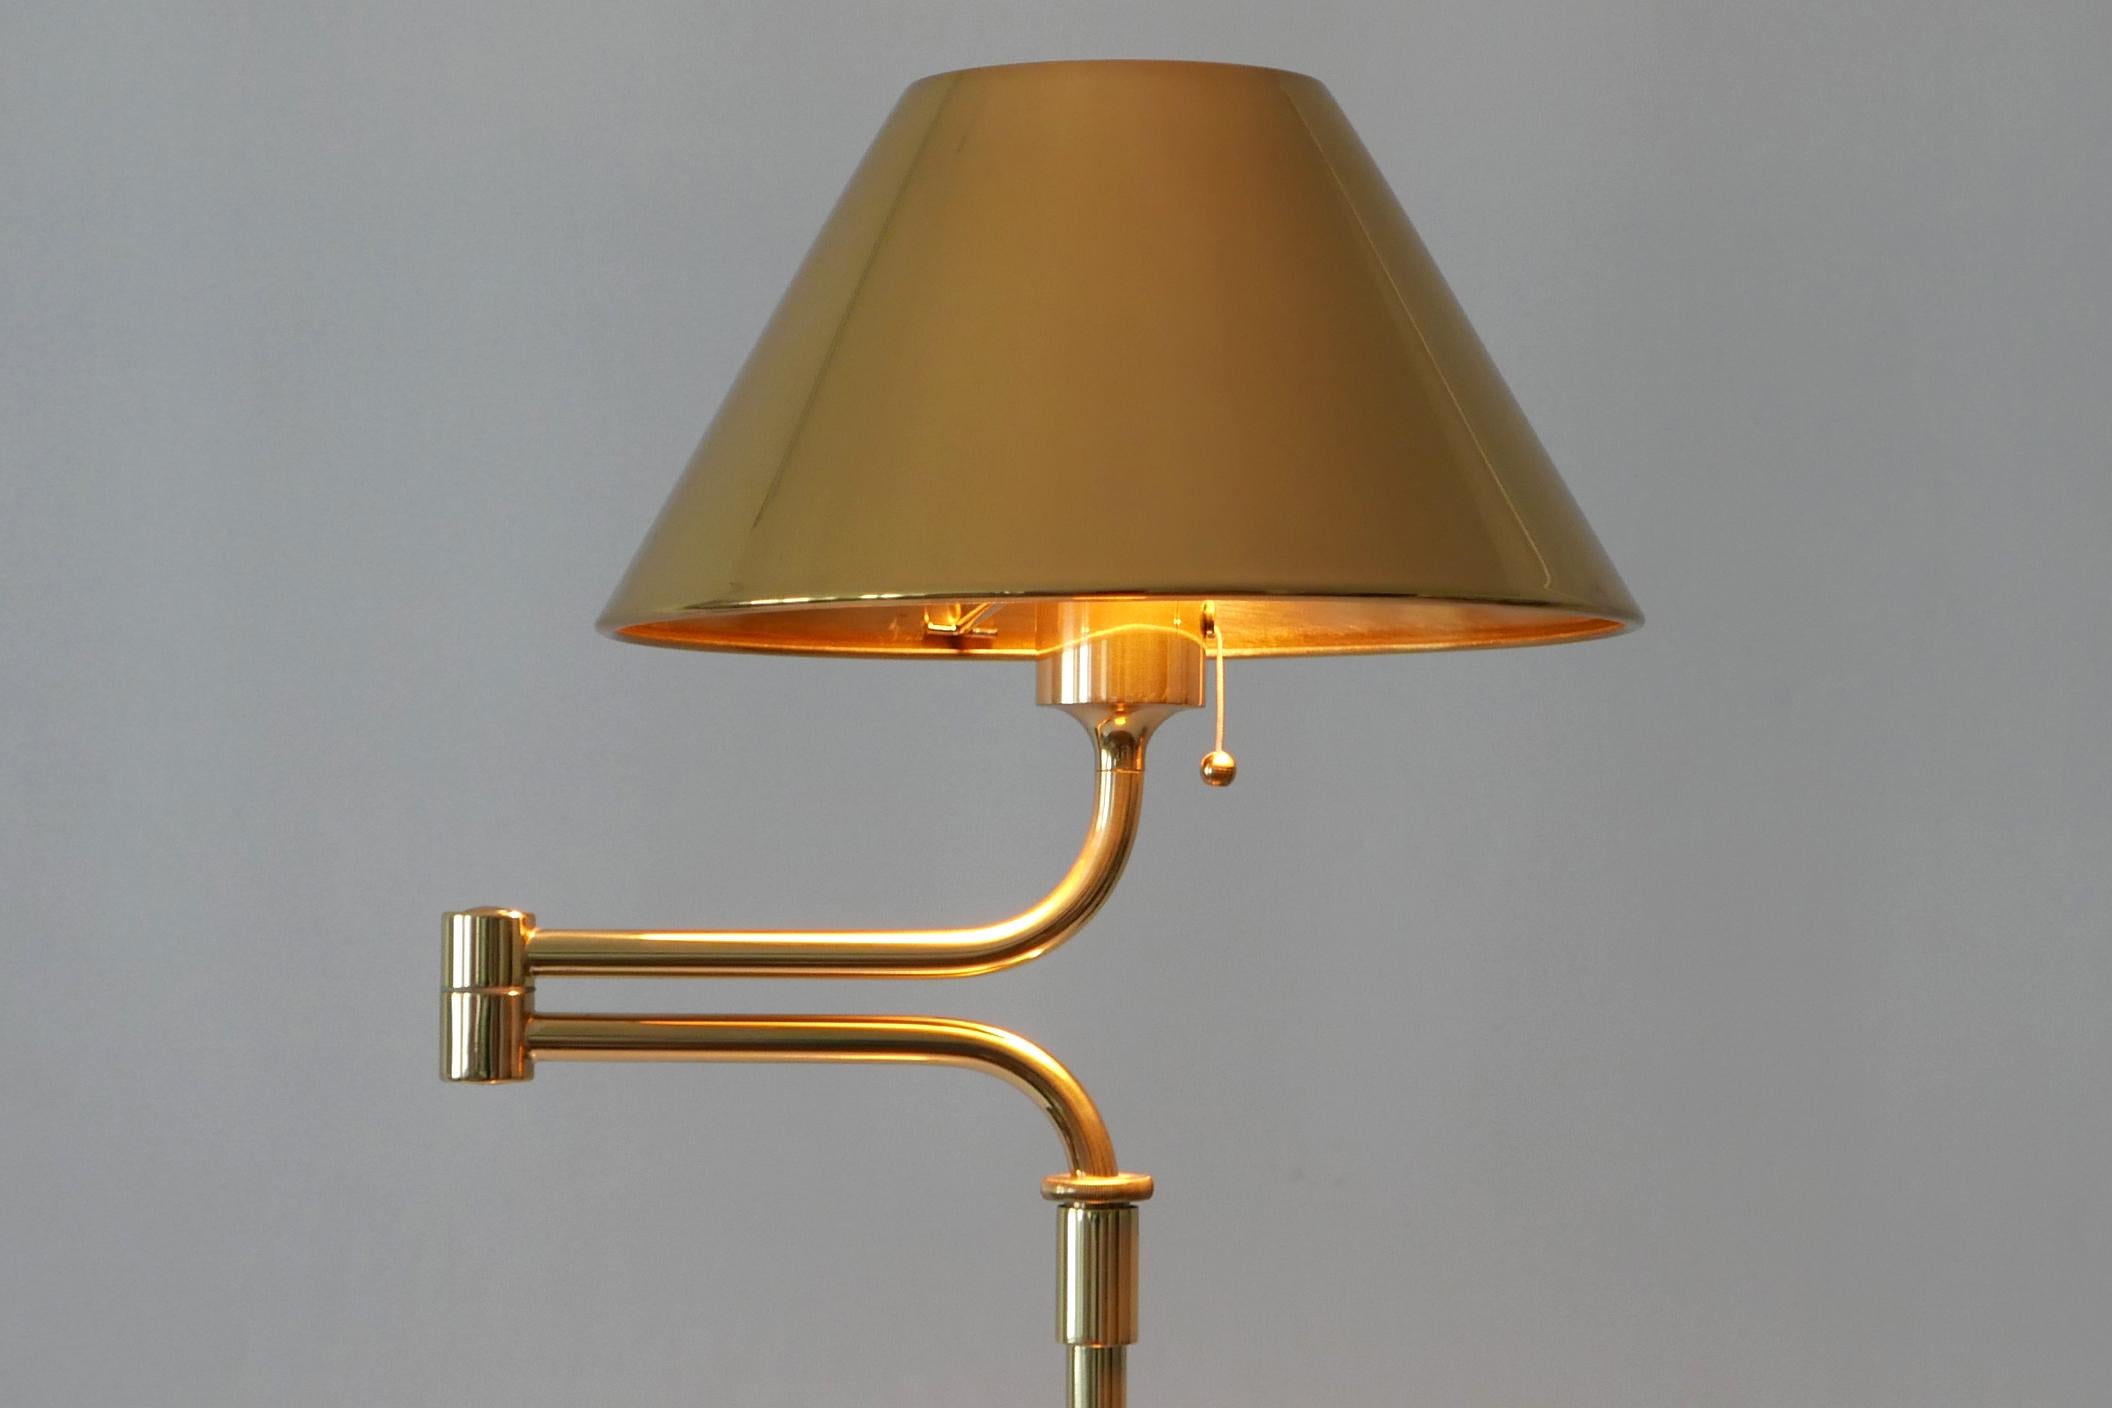 Articulated Brass Floor Lamp or Reading Light by Florian Schulz 1980s Germany 2